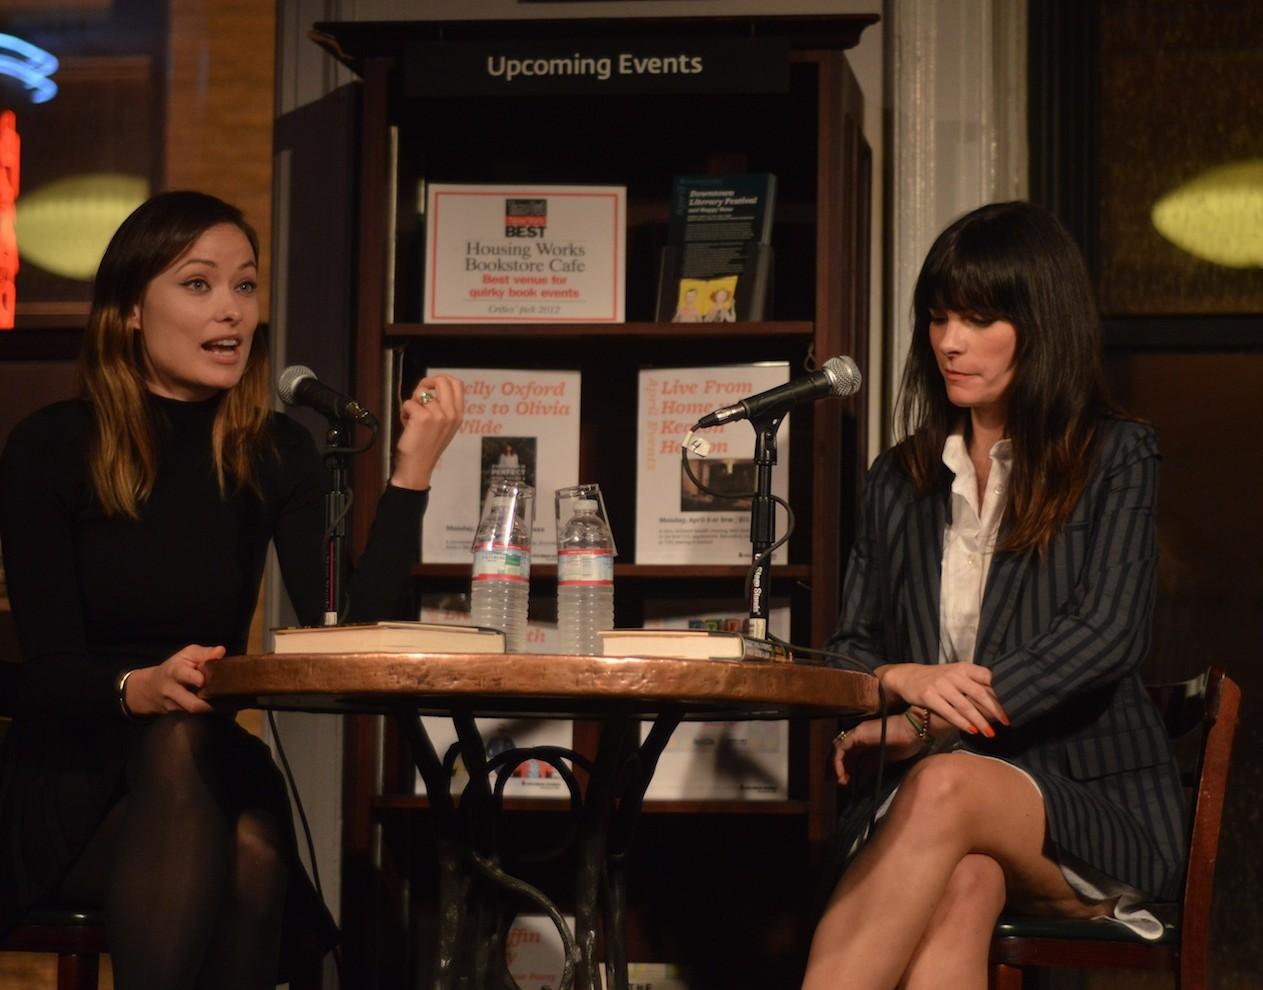 Olivia Wilde, left, and Kelly Oxford, right, discuss Oxford's book "Everything is Perfect When You're a Liar," at Housing Works Bookstore Cafe on April 1. (Ian McKenna/The Observer)